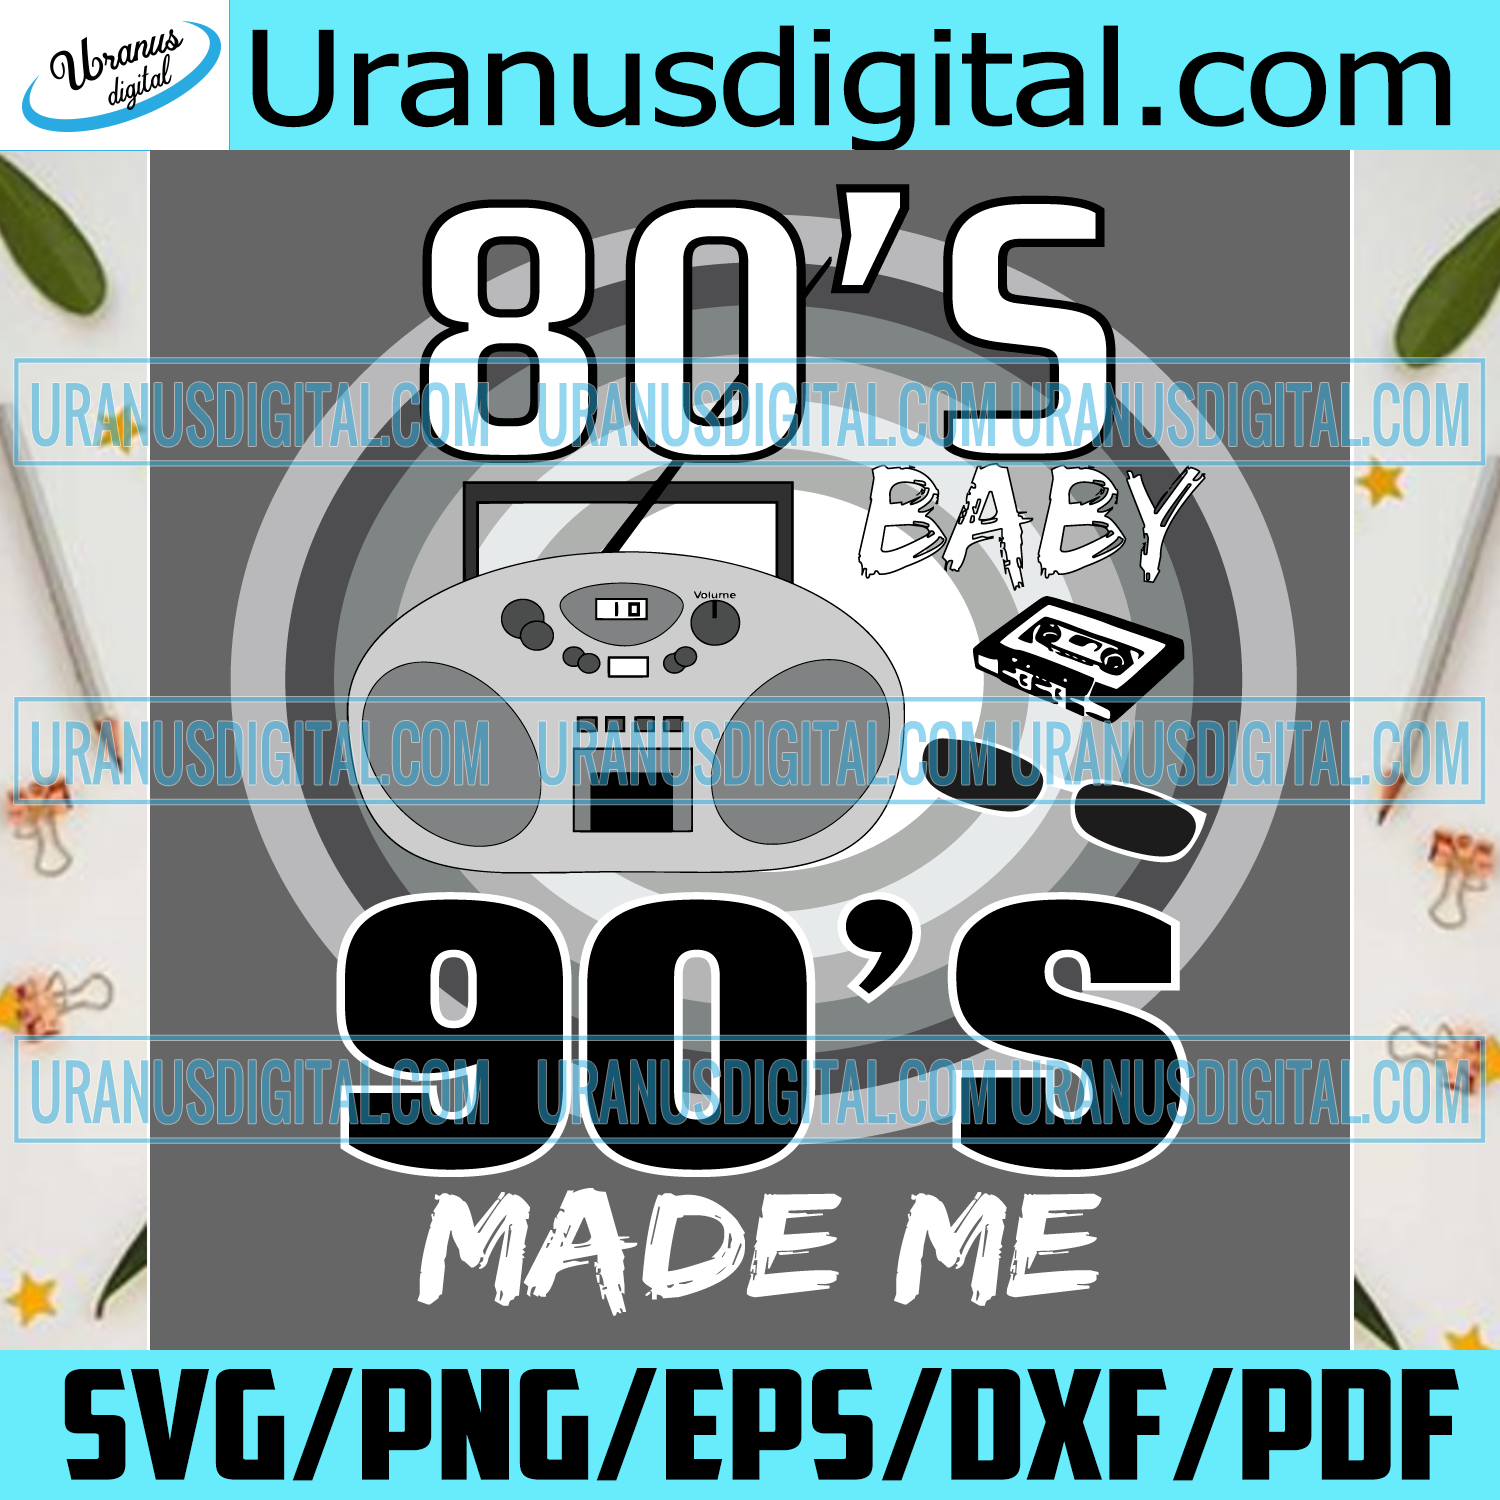 Download 80s Baby 90s Made Me Svg Birthday Svg 80s Baby Svg 90s Made Me Svg Uranusdigital